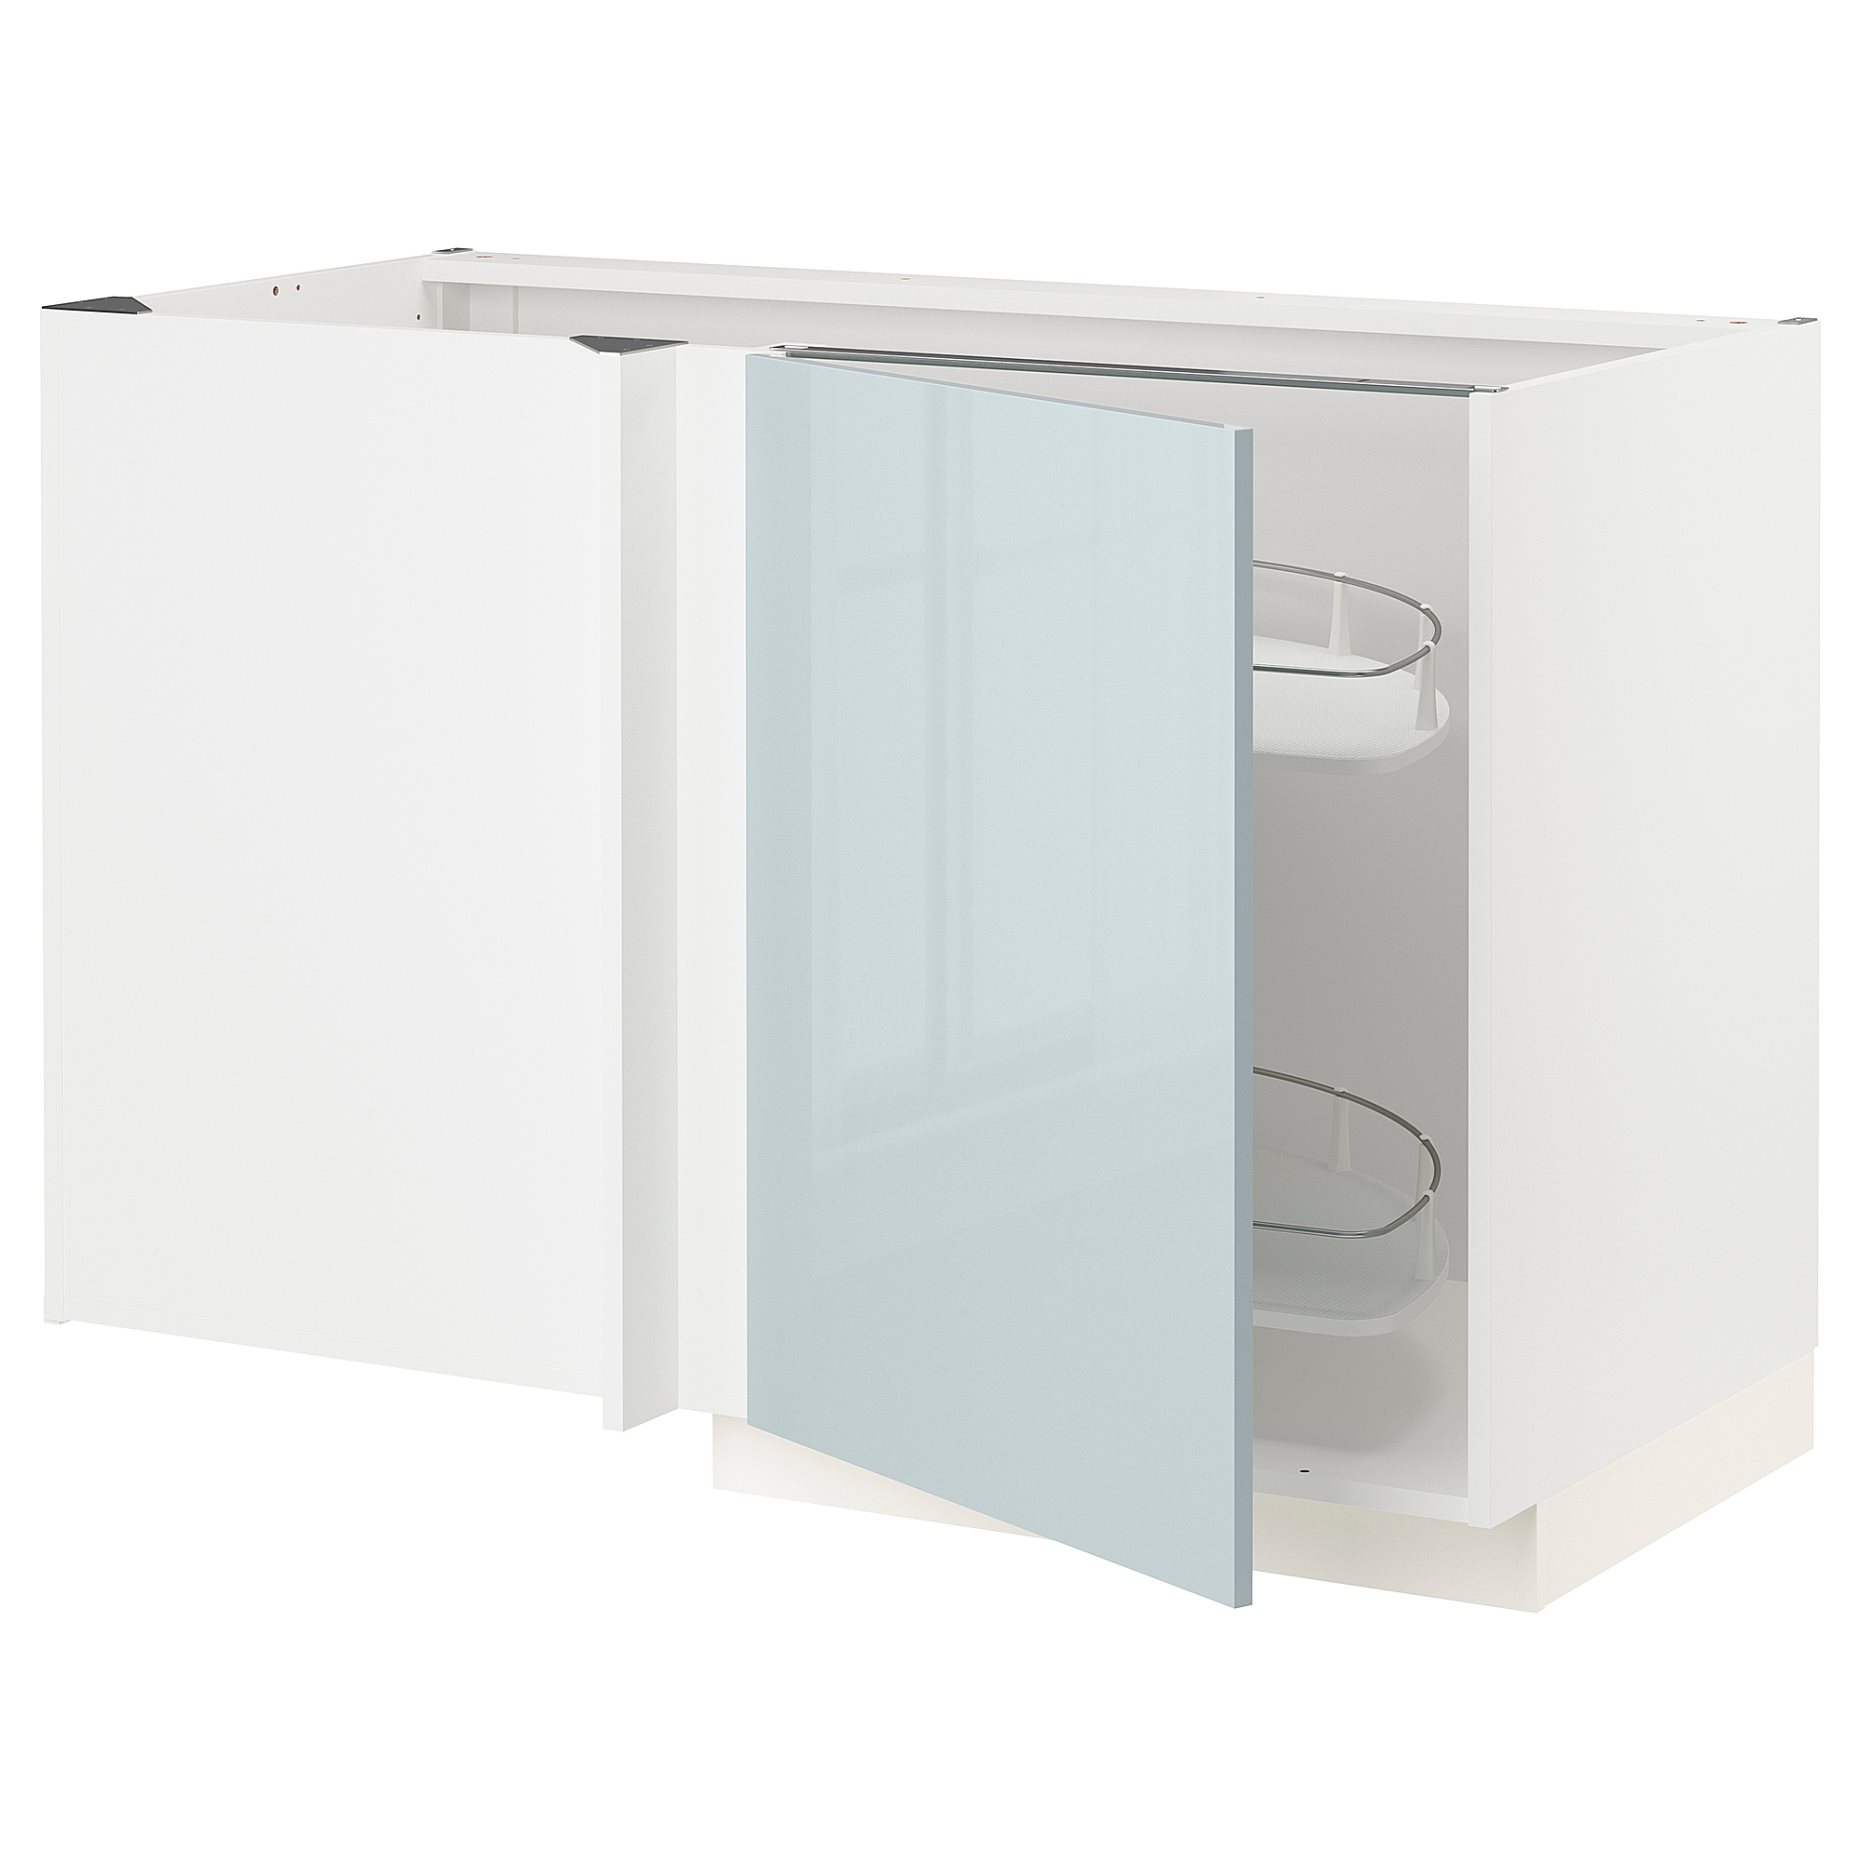 METOD, corner base cabinet with pull-out fitting, 128x68 cm, 094.795.58